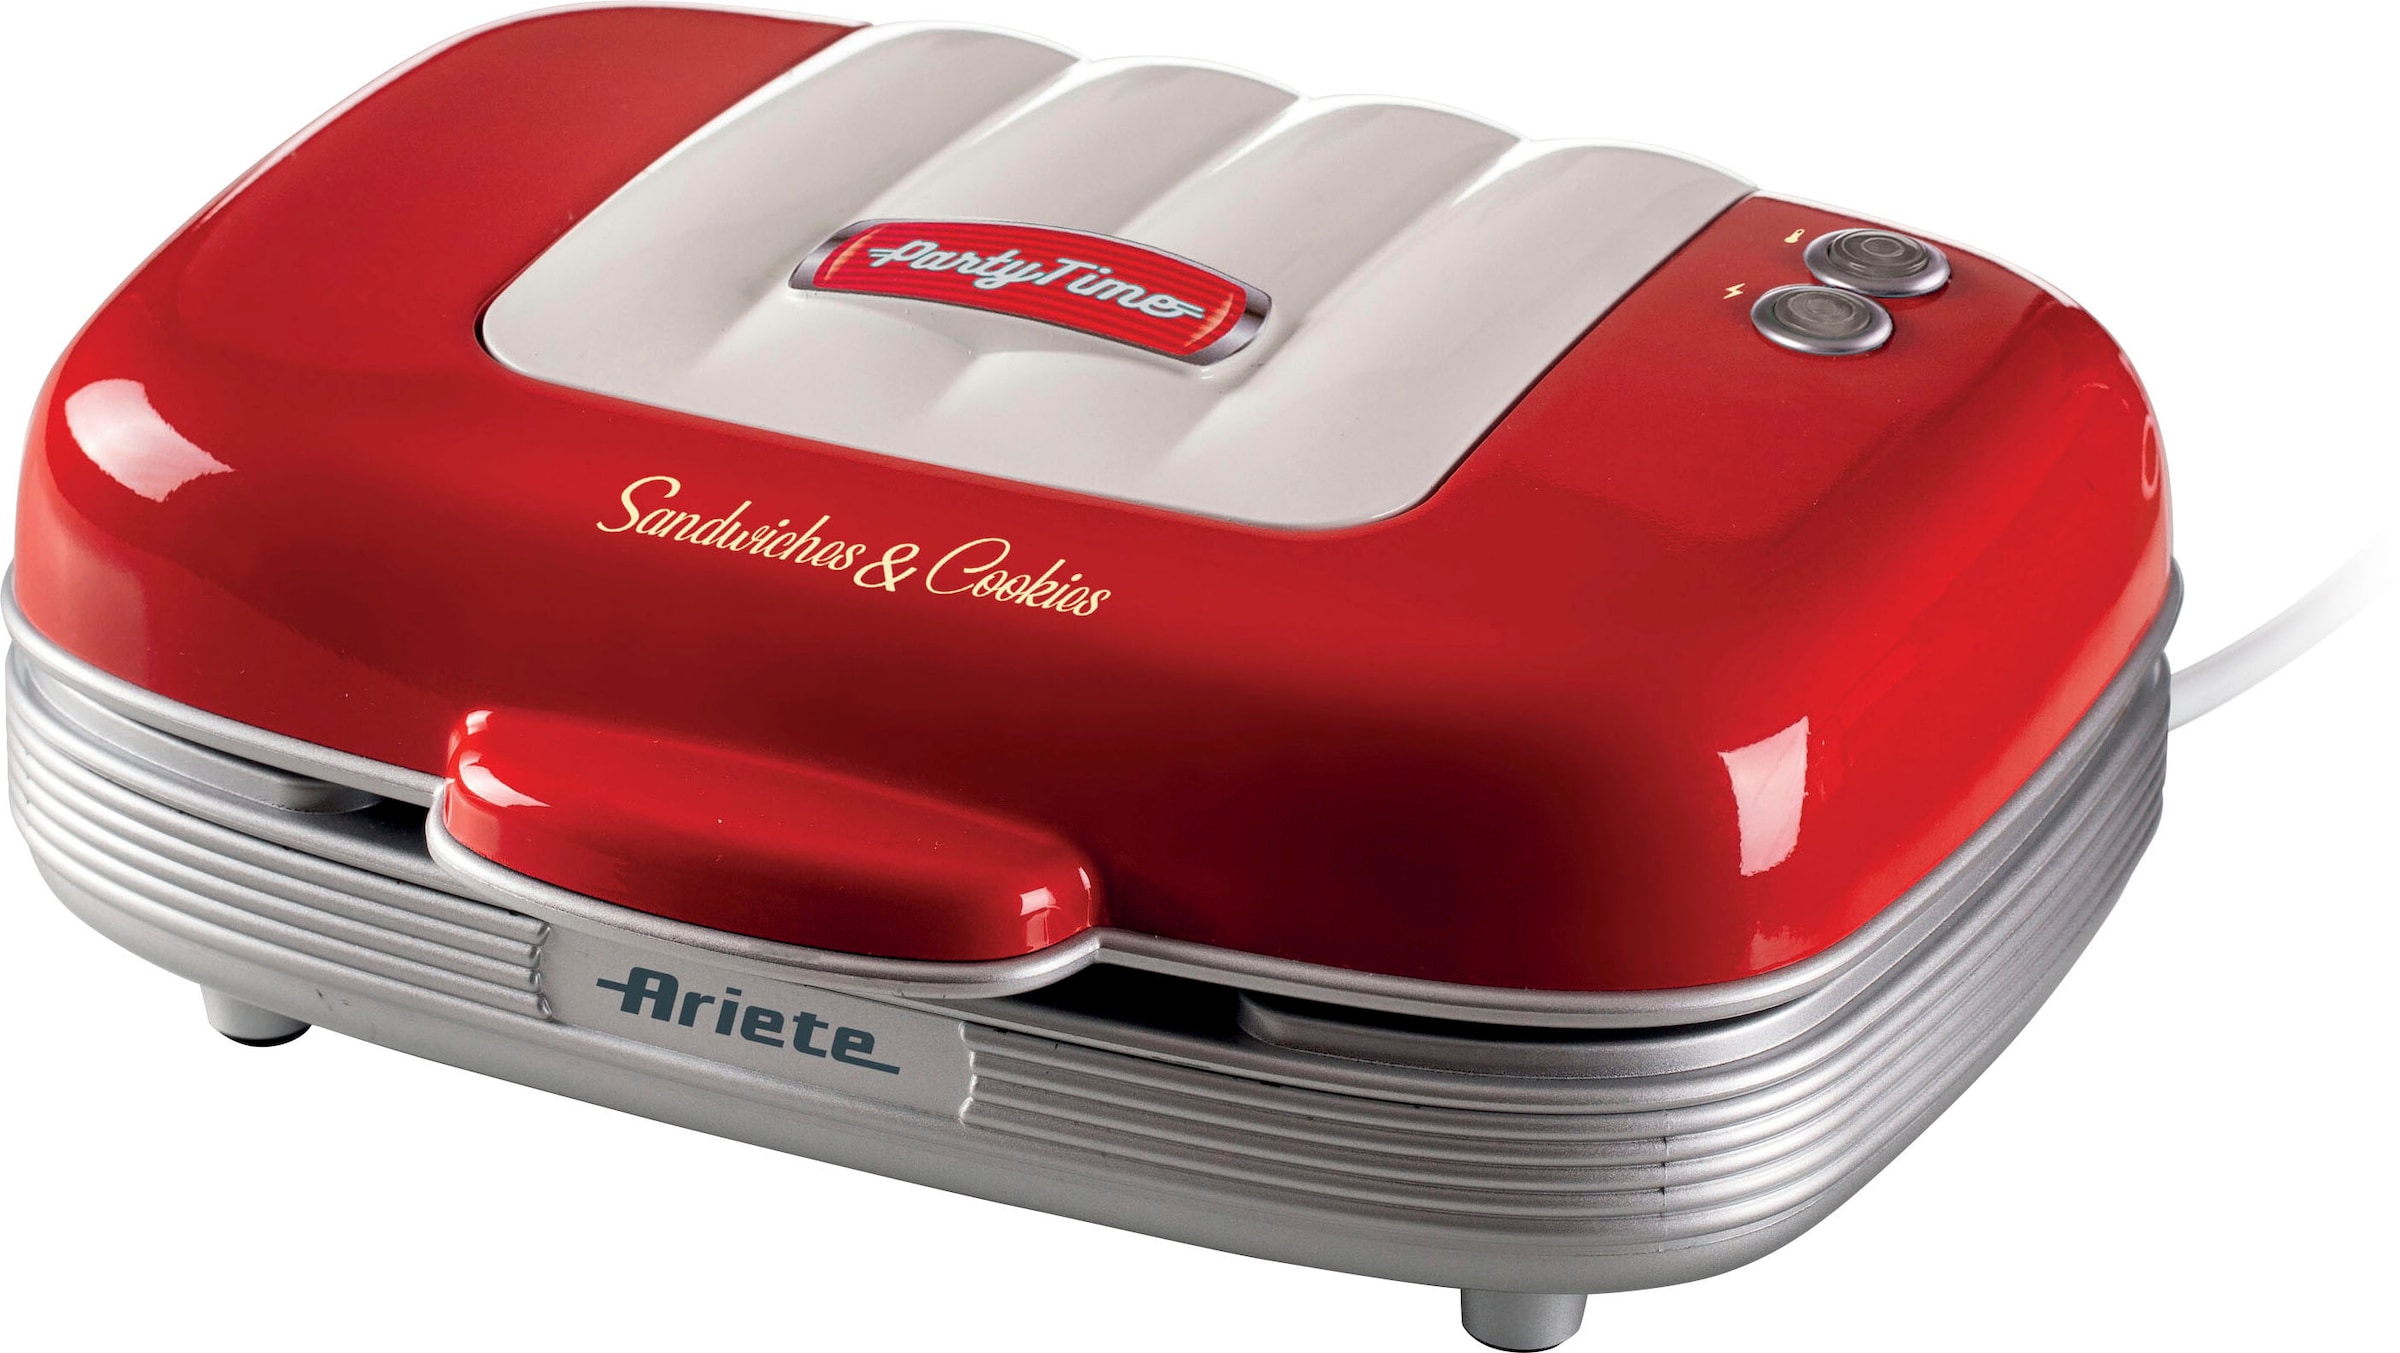 3-in-1-Sandwichmaker »Party Time 1972R«, 700 W, Cookie-Maker, rot